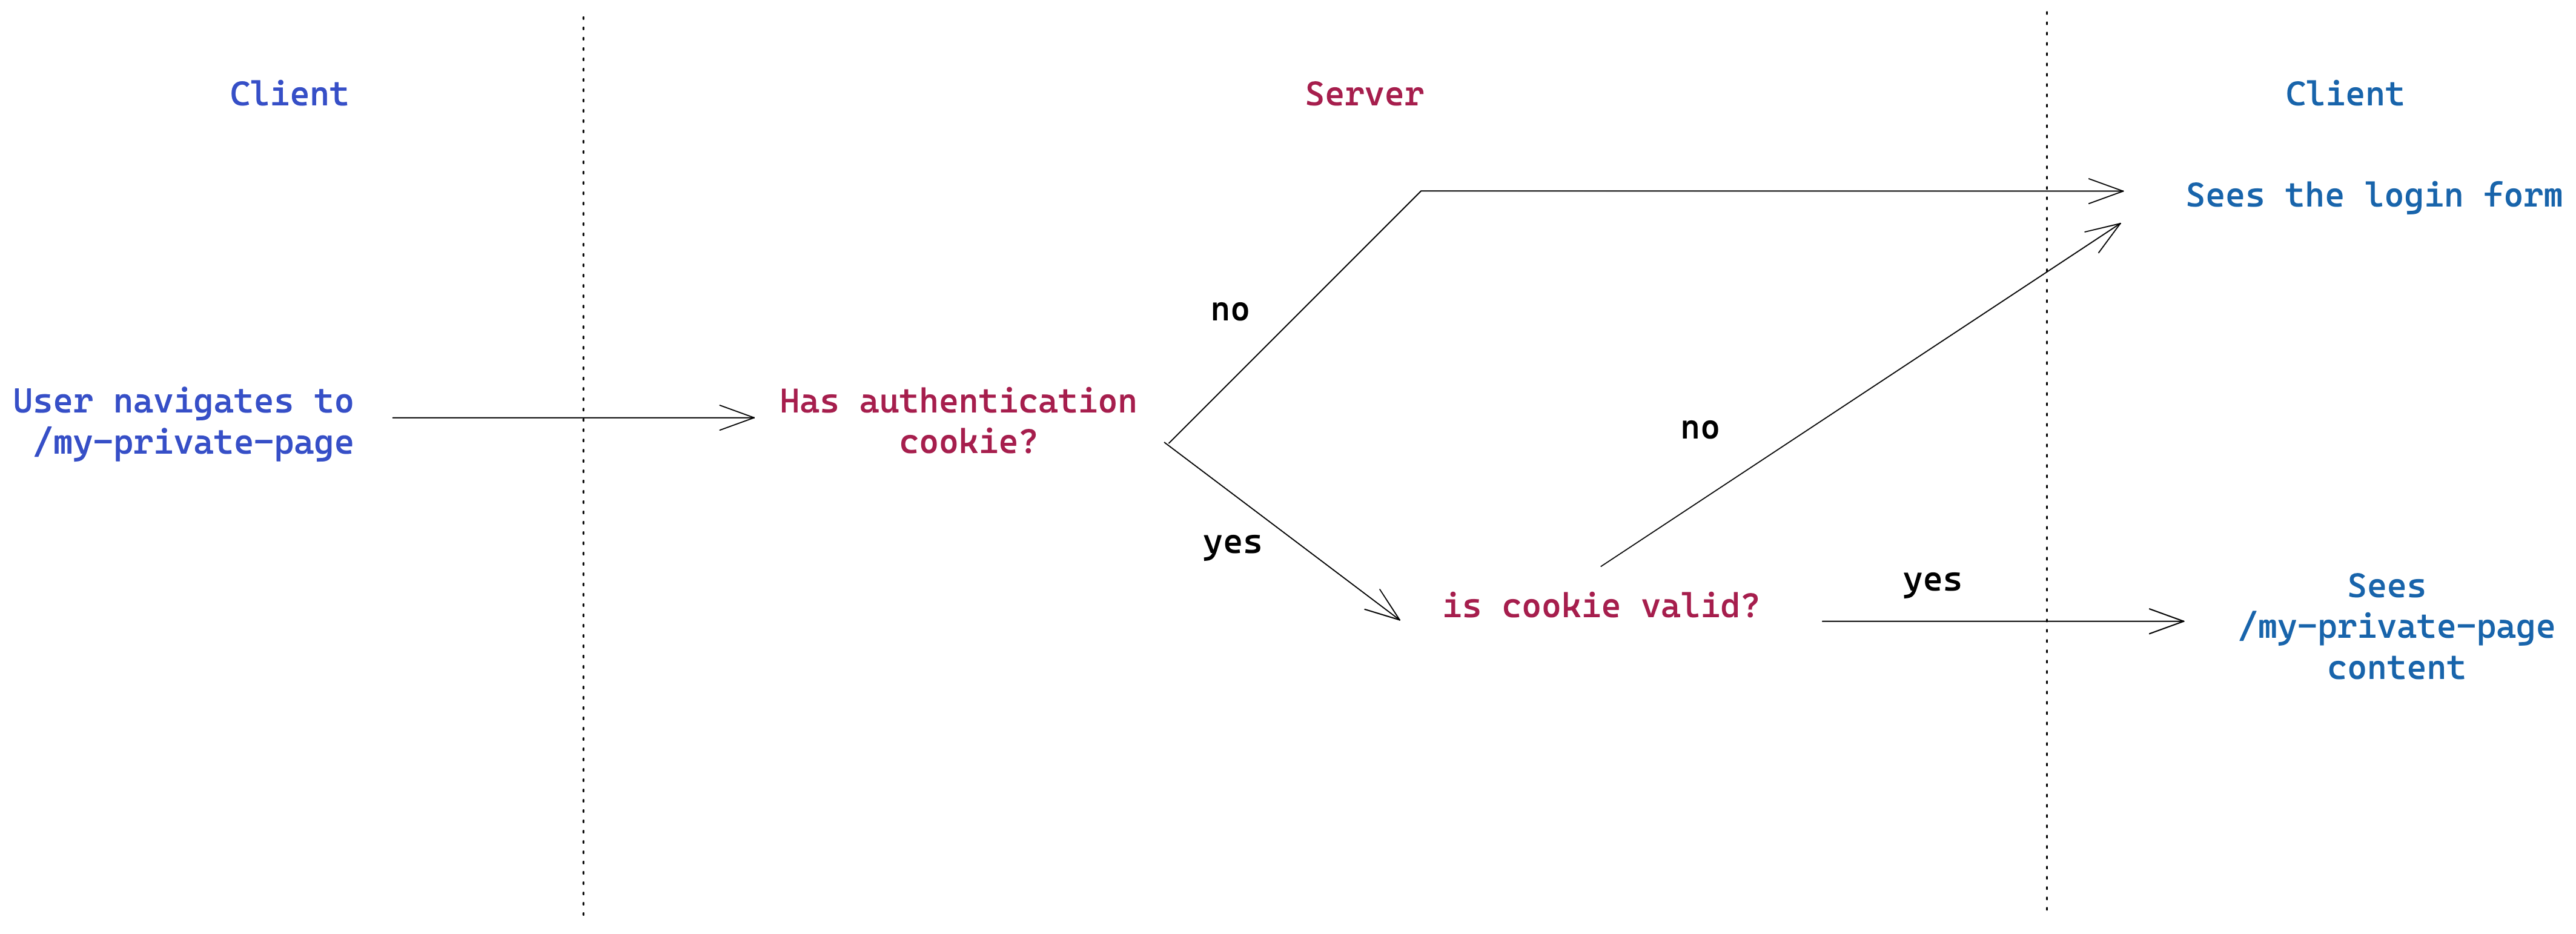 Diagram that shows the authentication process when it's done in the server's side.